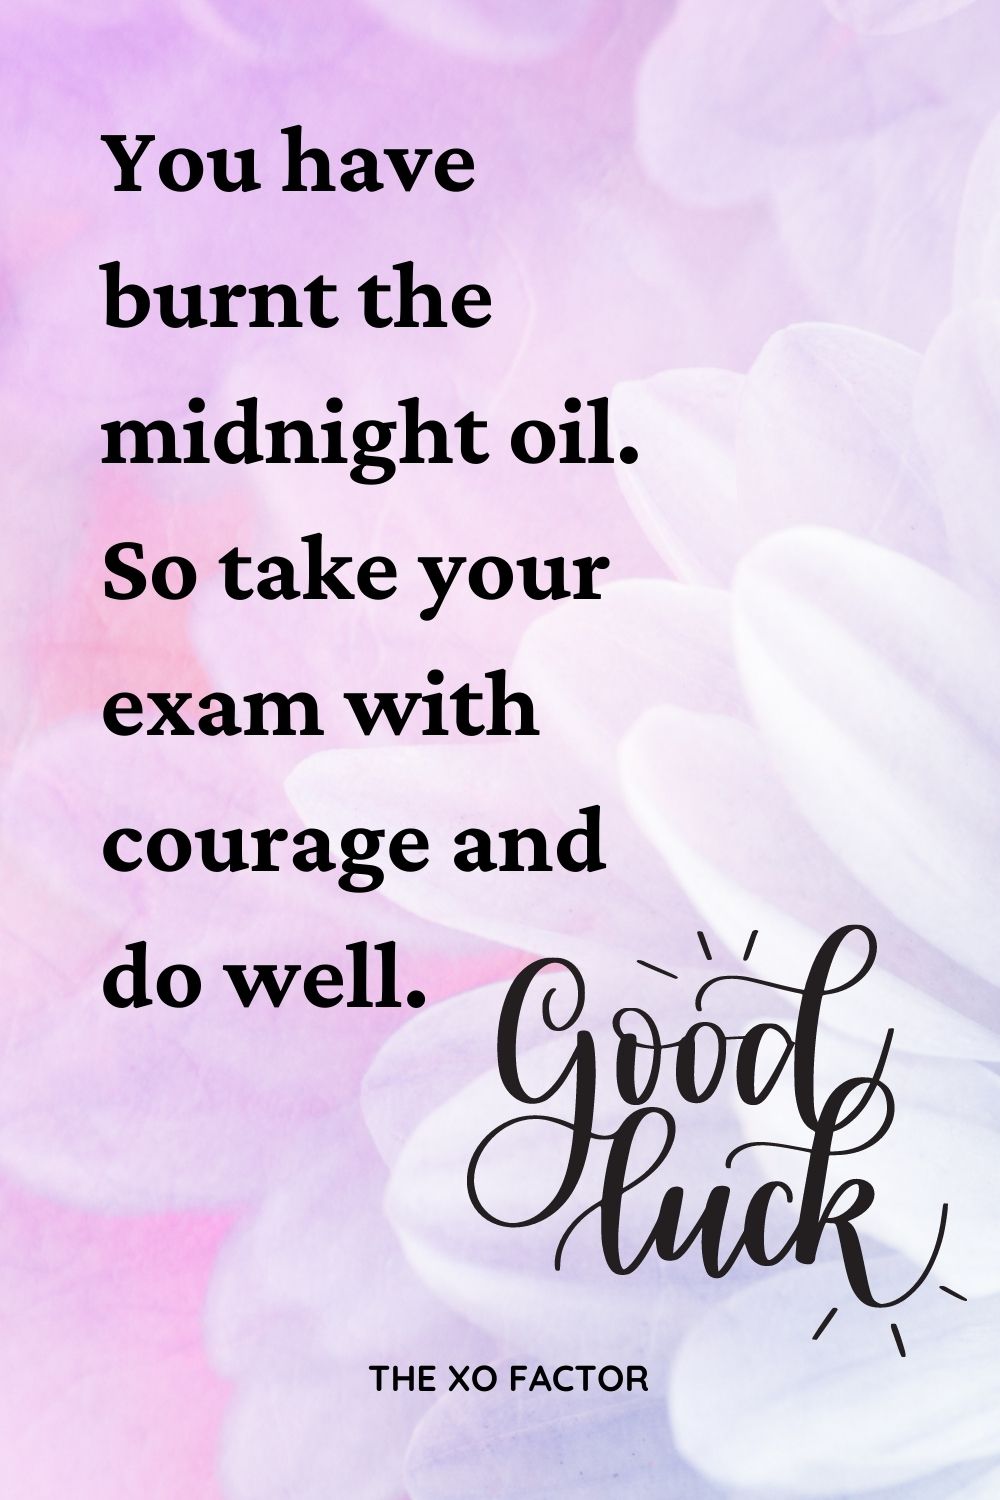 You have burnt the midnight oil. So take your exam with courage and do well. Good luck!